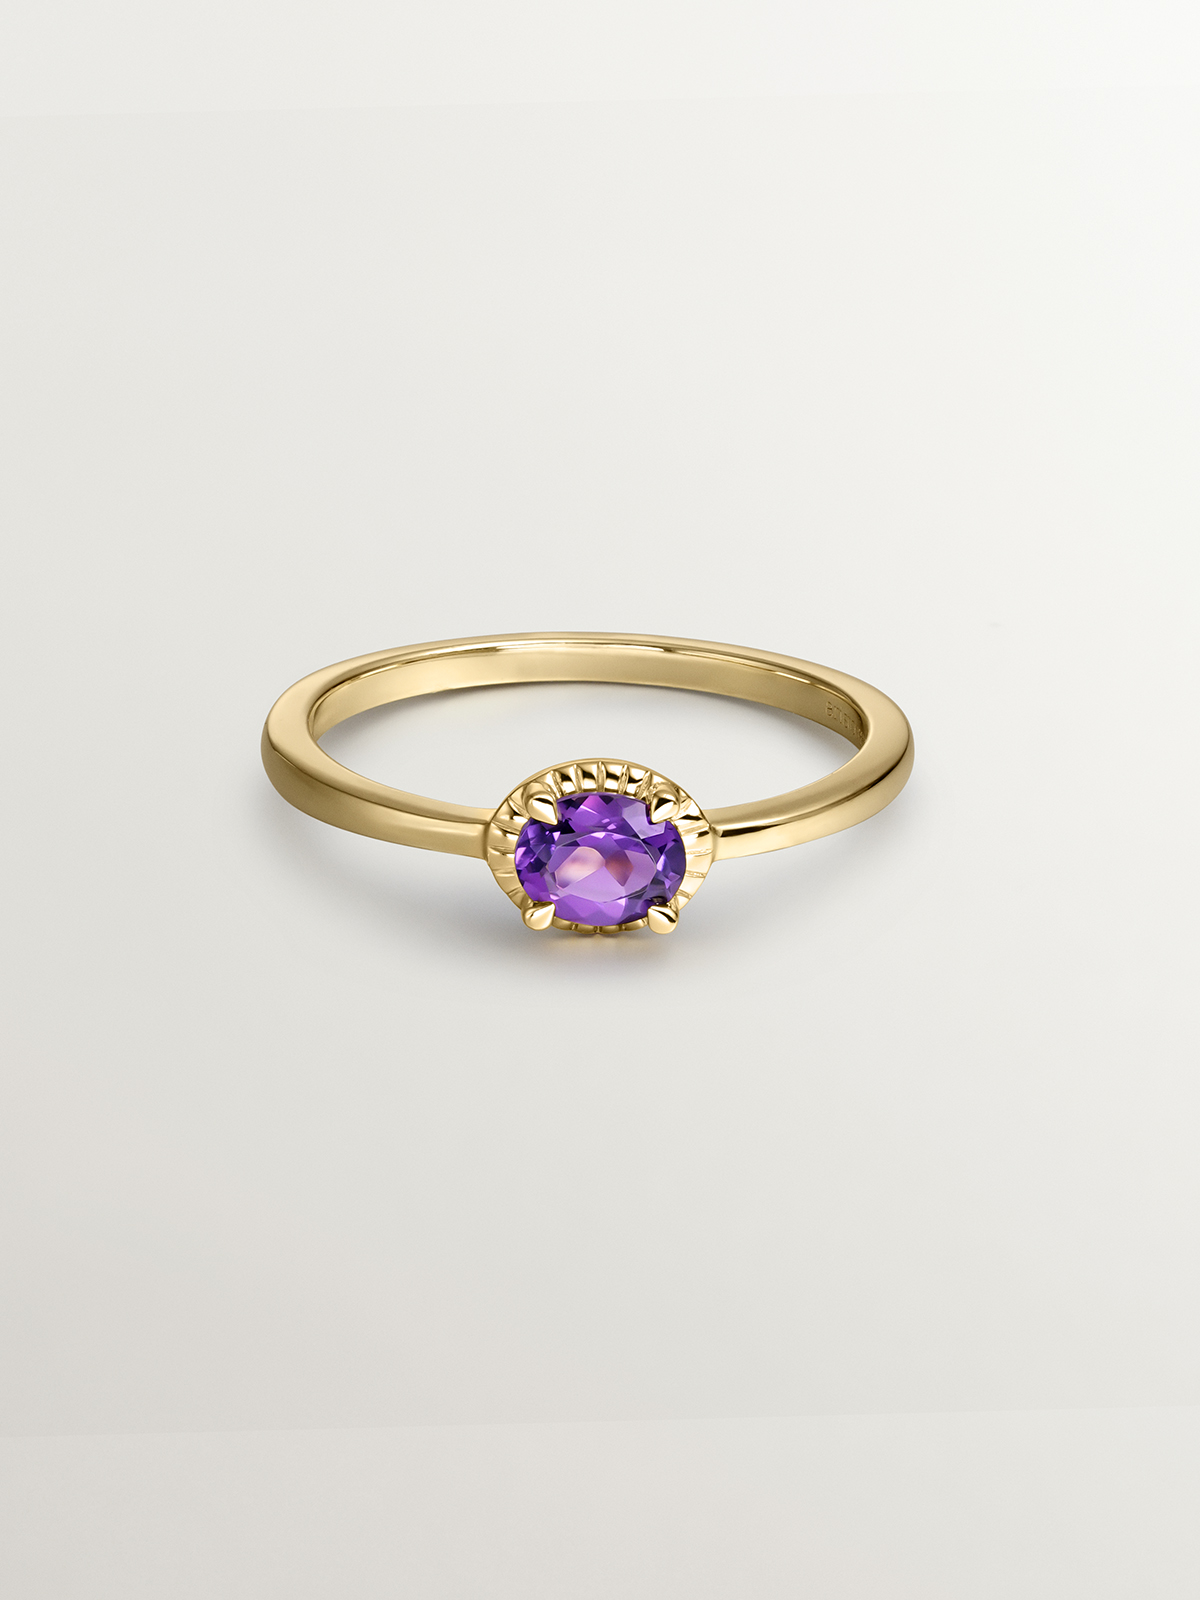 925 Silver ring bathed in 18K yellow gold with purple amethyst stone.